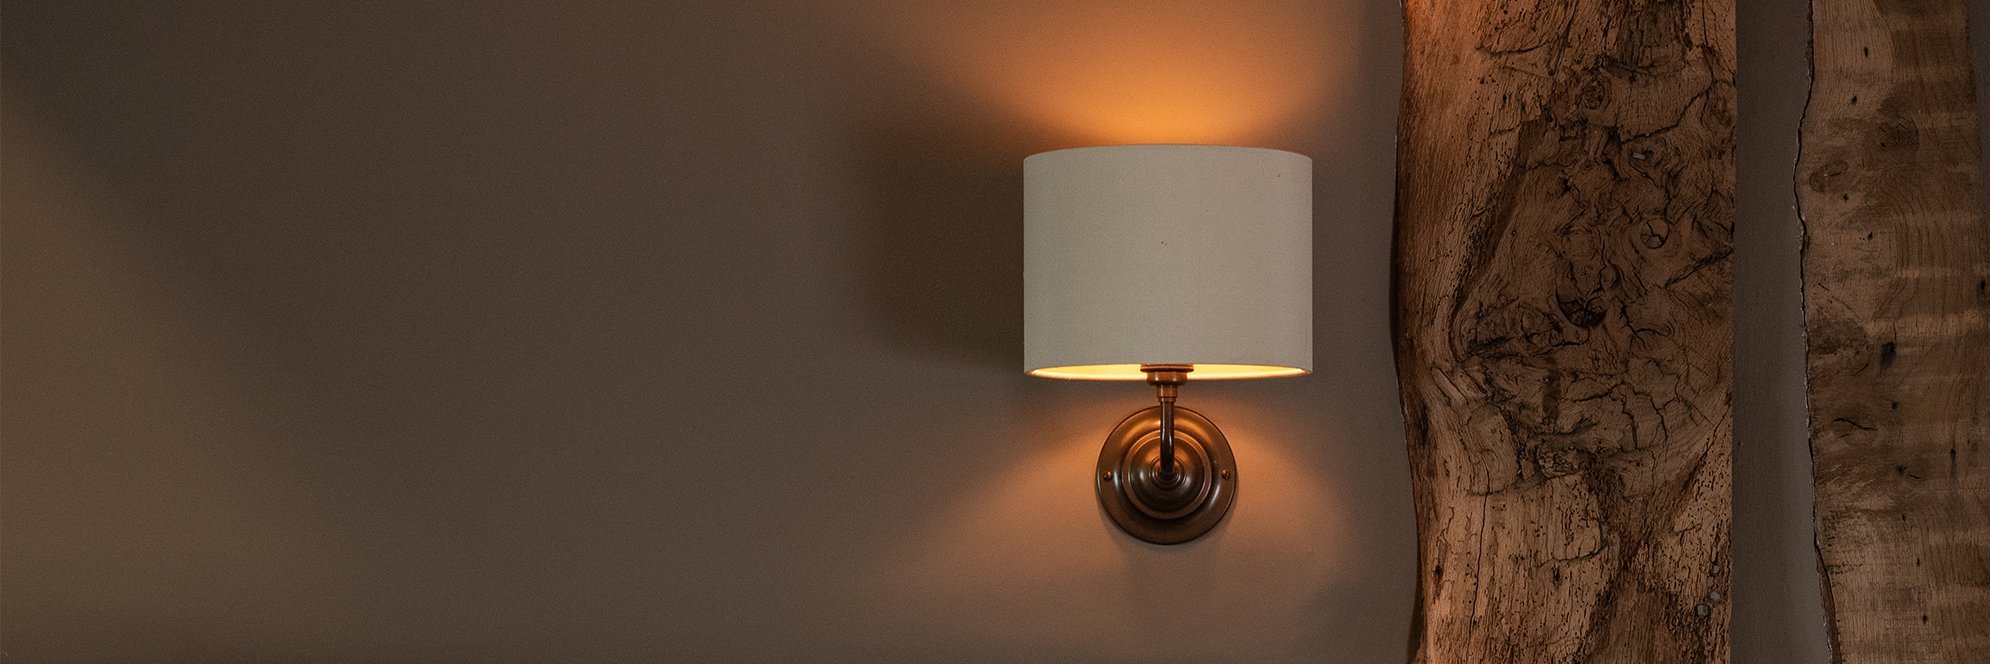 The Classic wall light with Fawley fabric shade in an antique brass finish, beside old beam in hotel.